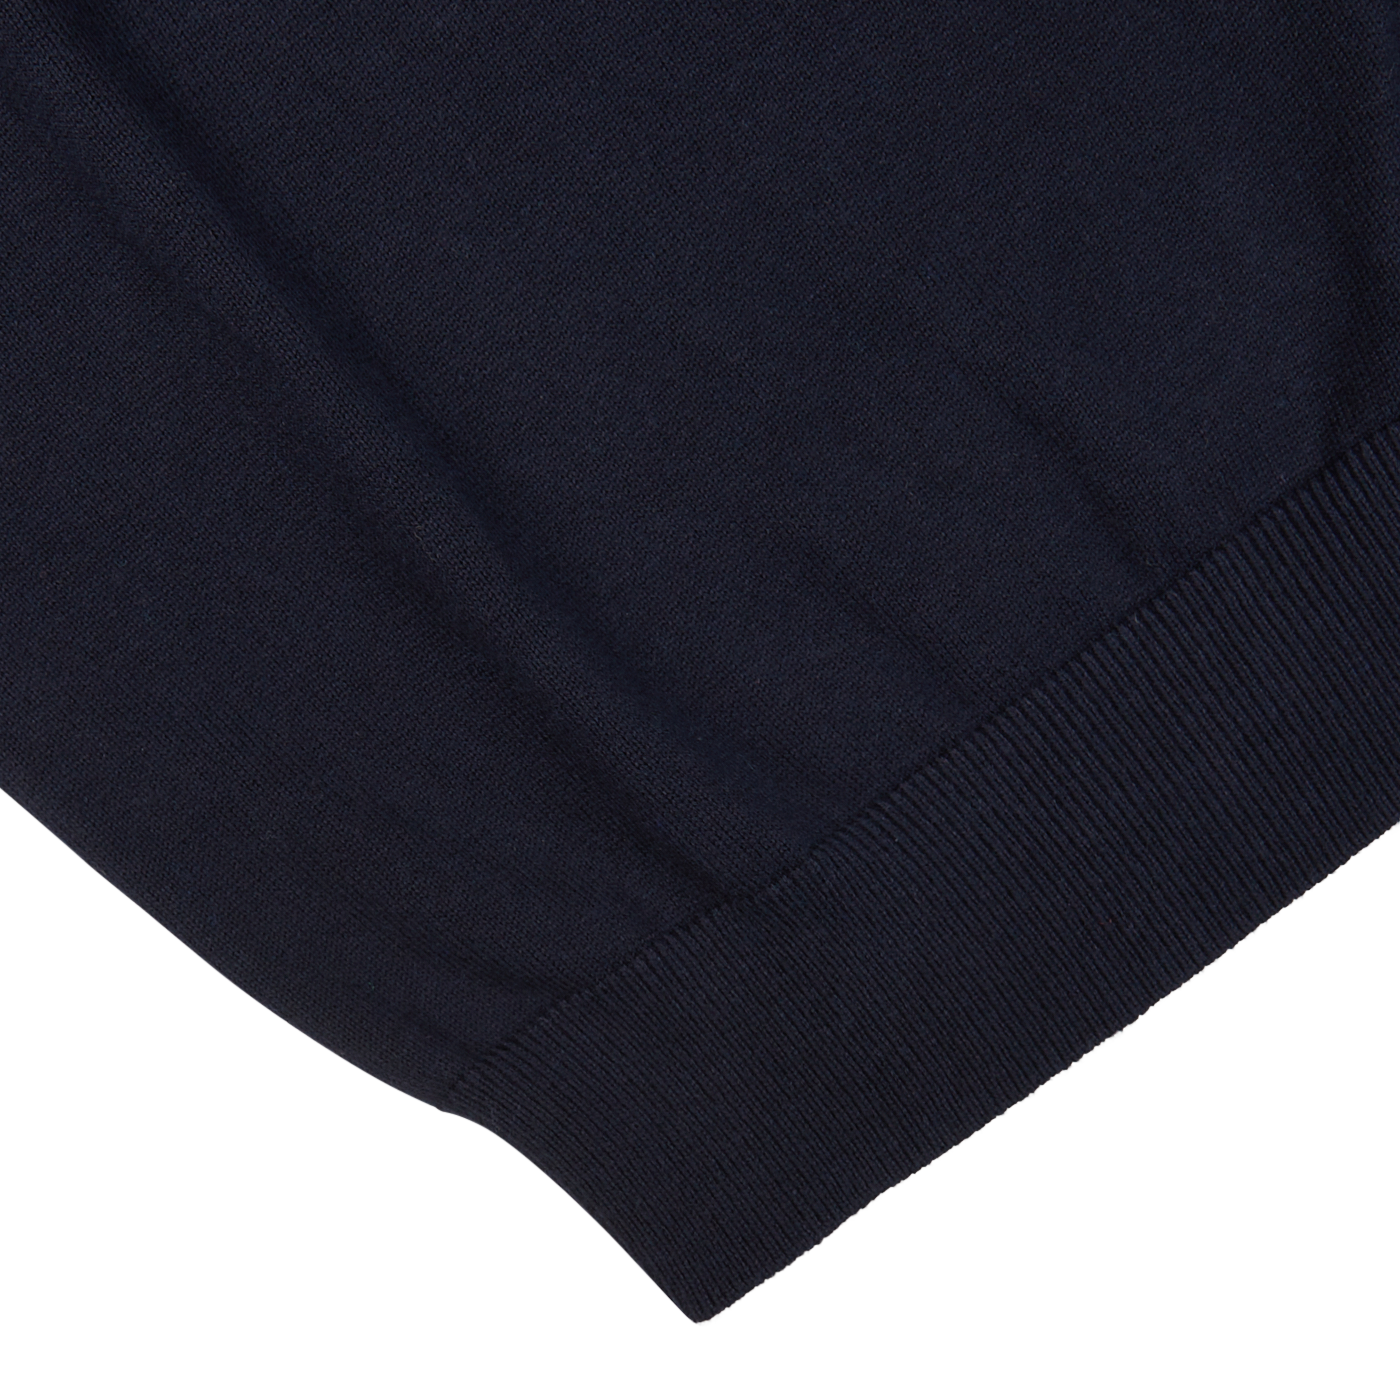 Navy blue luxury cashmere beanie hat displayed on a white background. 
(Product: Navy Blue Luxury Cashmere Beanie Hat
Brand: None mentioned) 

Navy blue luxury cotton crewneck displayed on a white background.
(Product: Navy Blue Luxury Cotton Crewneck
Brand: Alan Paine)